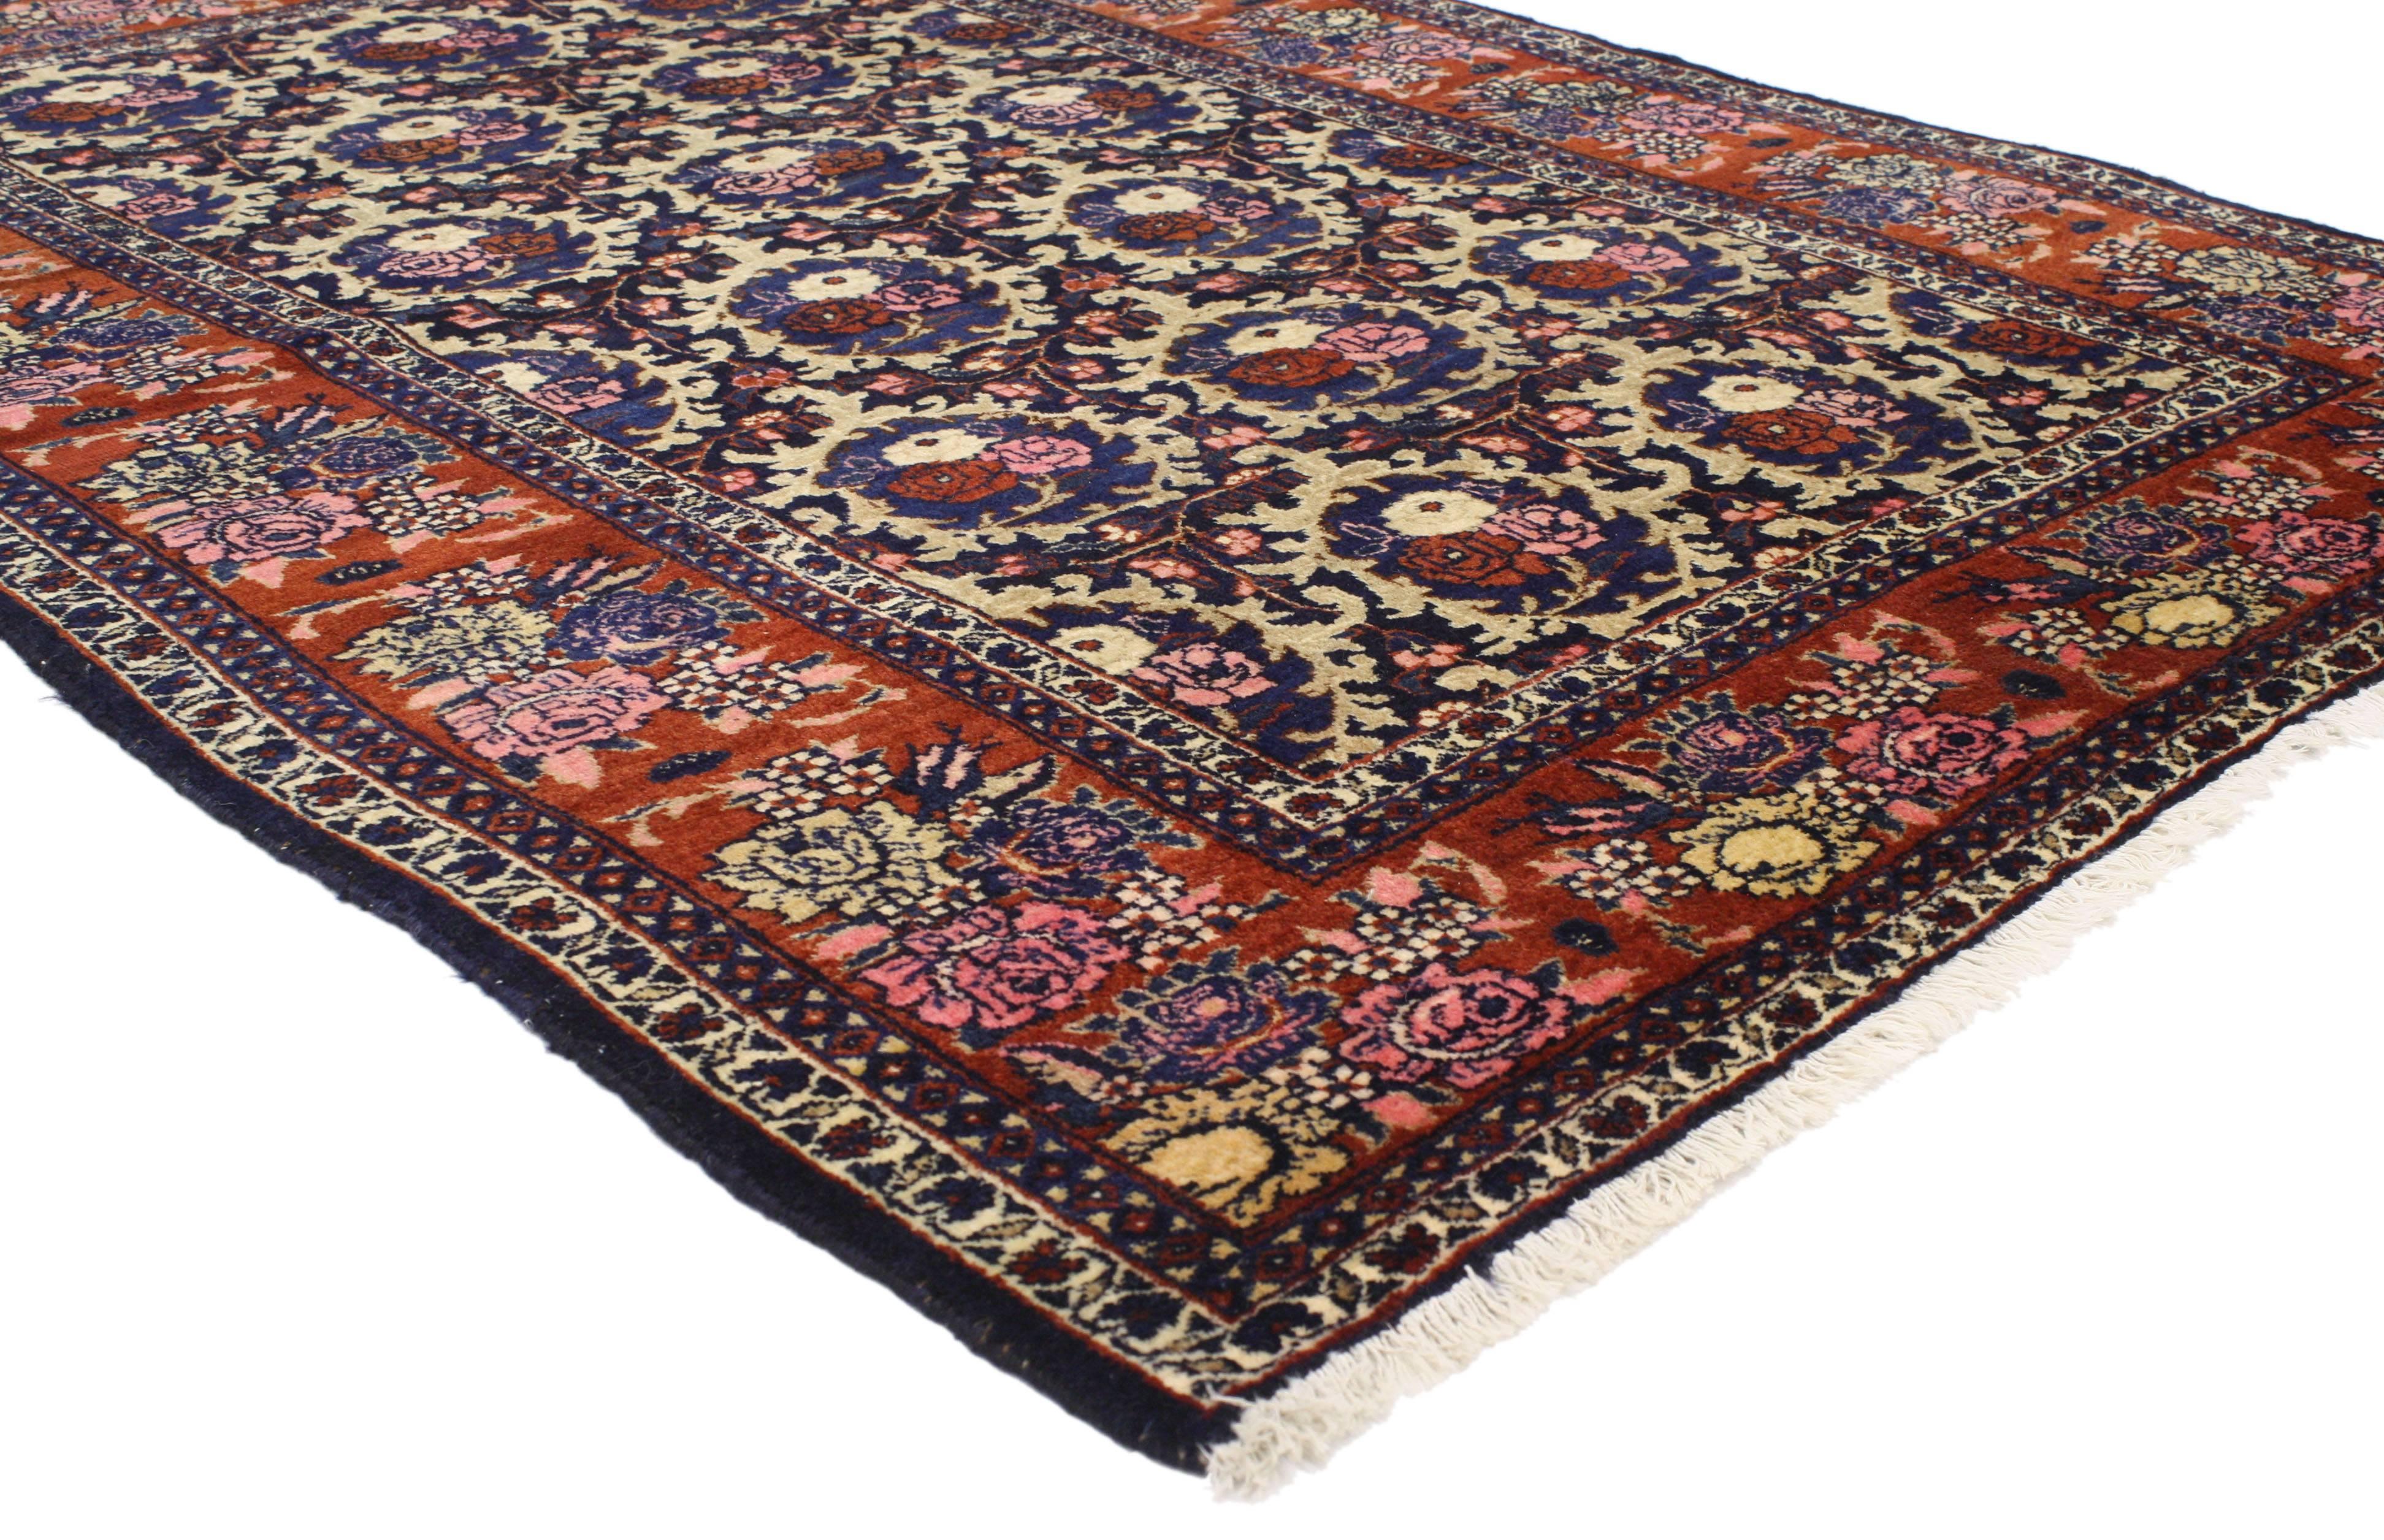 77012 Antique Persian Bijar Rug with Traditional Style and Floral Compartment Design 04'09 x 06'06. This hand-knotted wool antique Persian Bijar rug features an elaborate all-over floral compartment design spread across an ink blue field. The